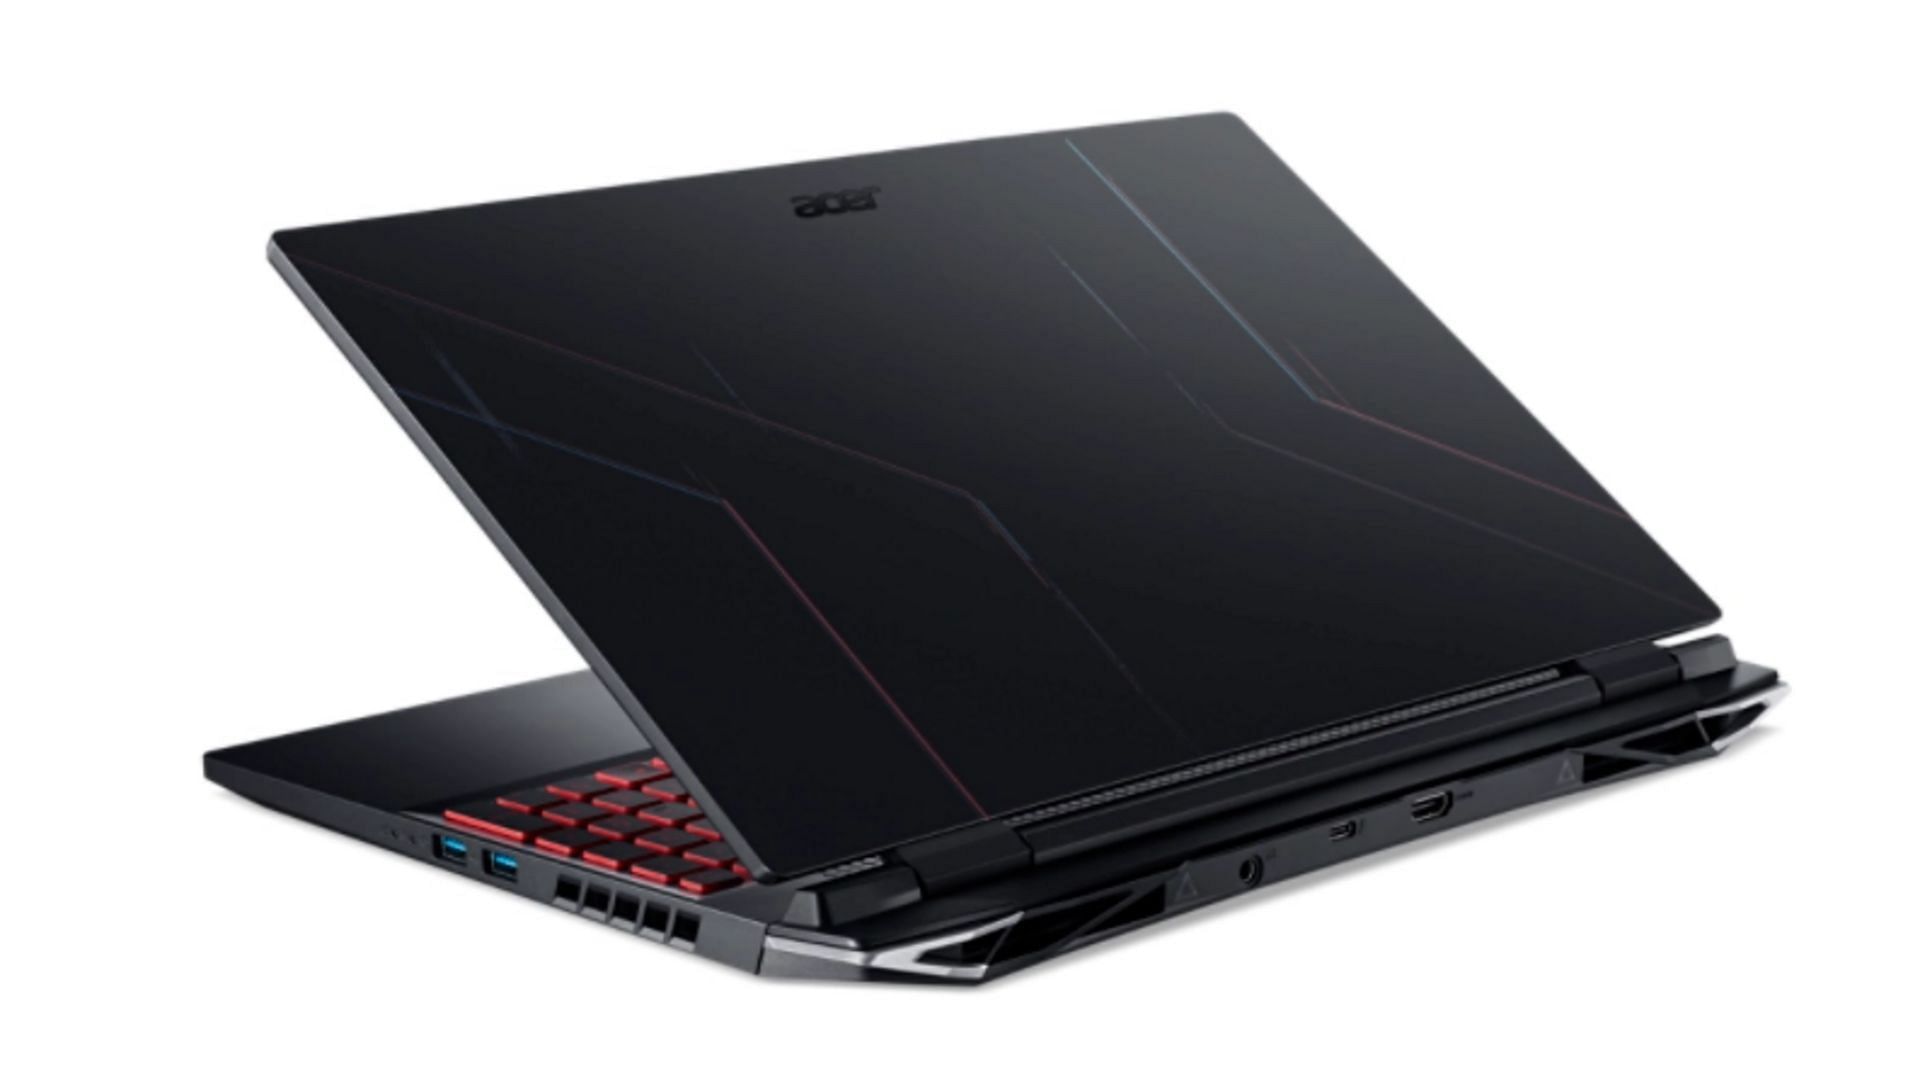 The A͏c͏er Nit͏ro ͏5 AN515-58-525P is a thin and light gaming laptop (Image via Acer)